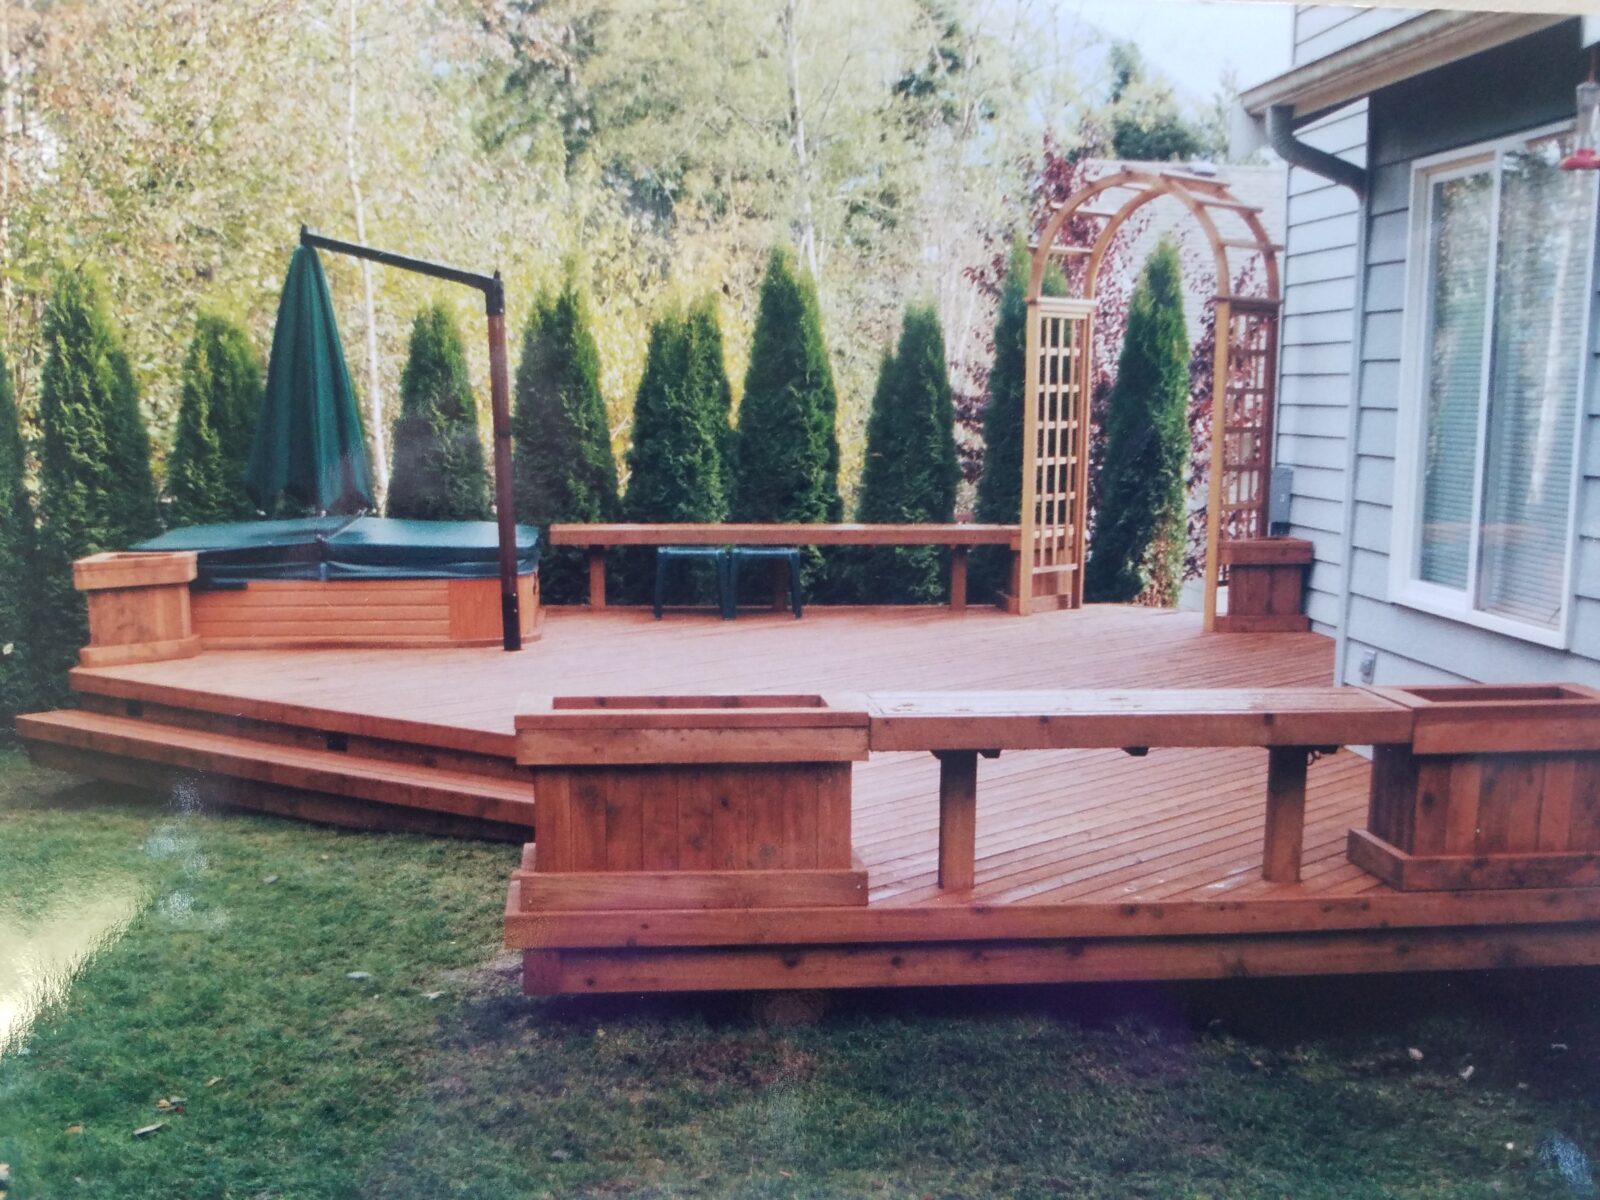 Deck with whirlpool and benches